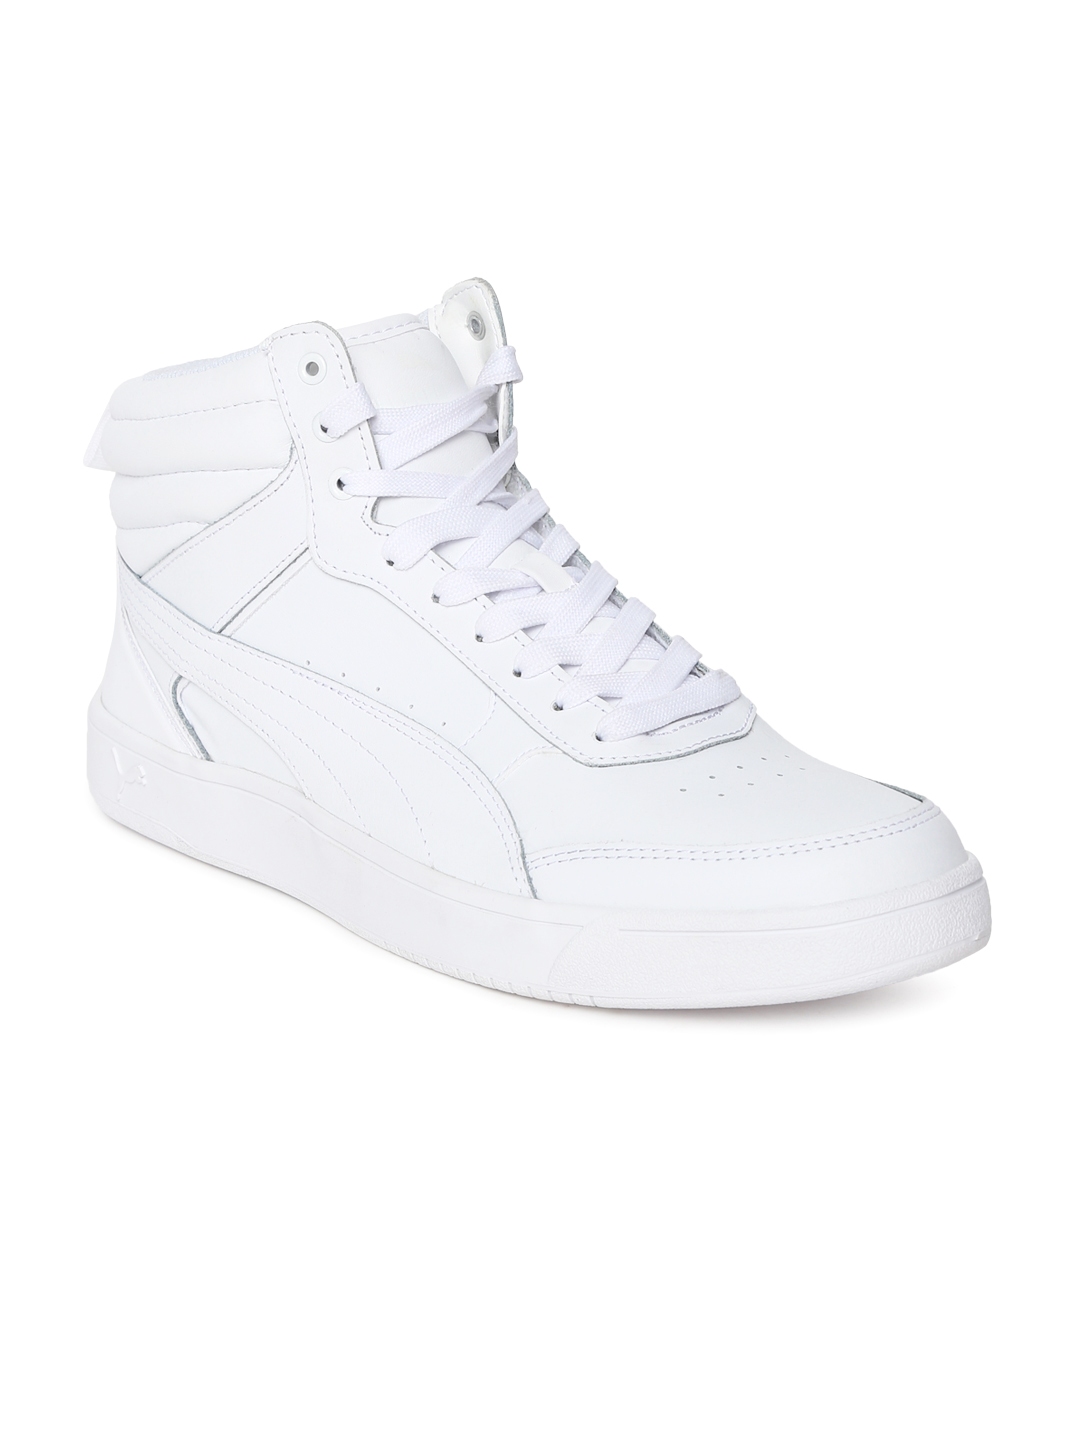 Puma Men White Solid Leather Rebound Street V2 L High Top Sneakers - Casual Shoes Men 2268898 | Myntra